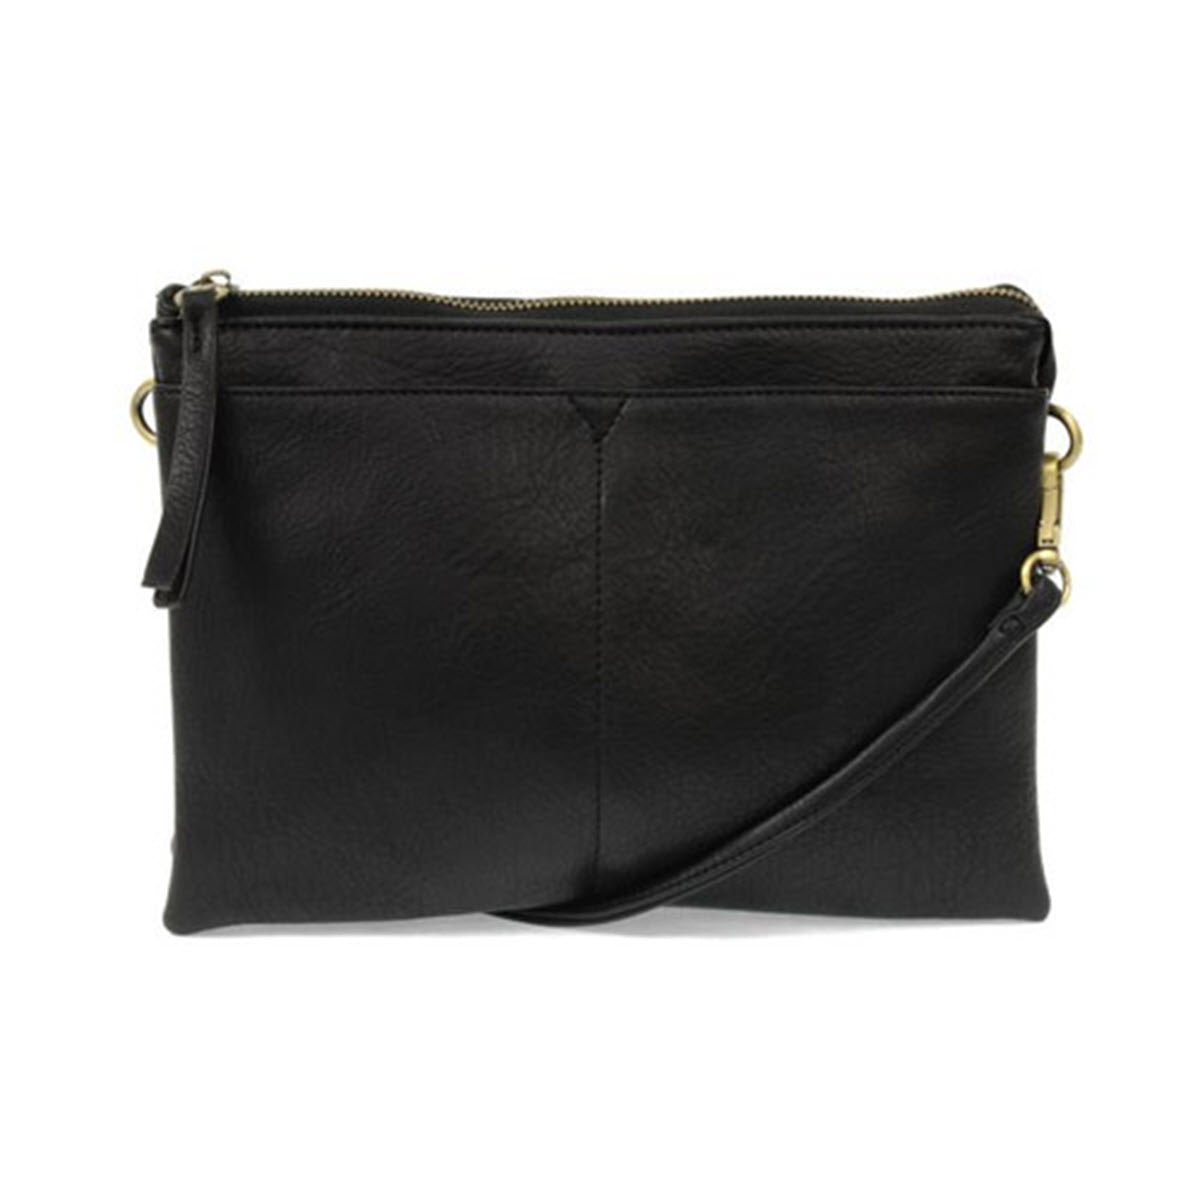 Joy Susan black leather JOY GIA wristlet with a zippered top and detachable strap, featuring multiple lightweight compartments, isolated on a white background.